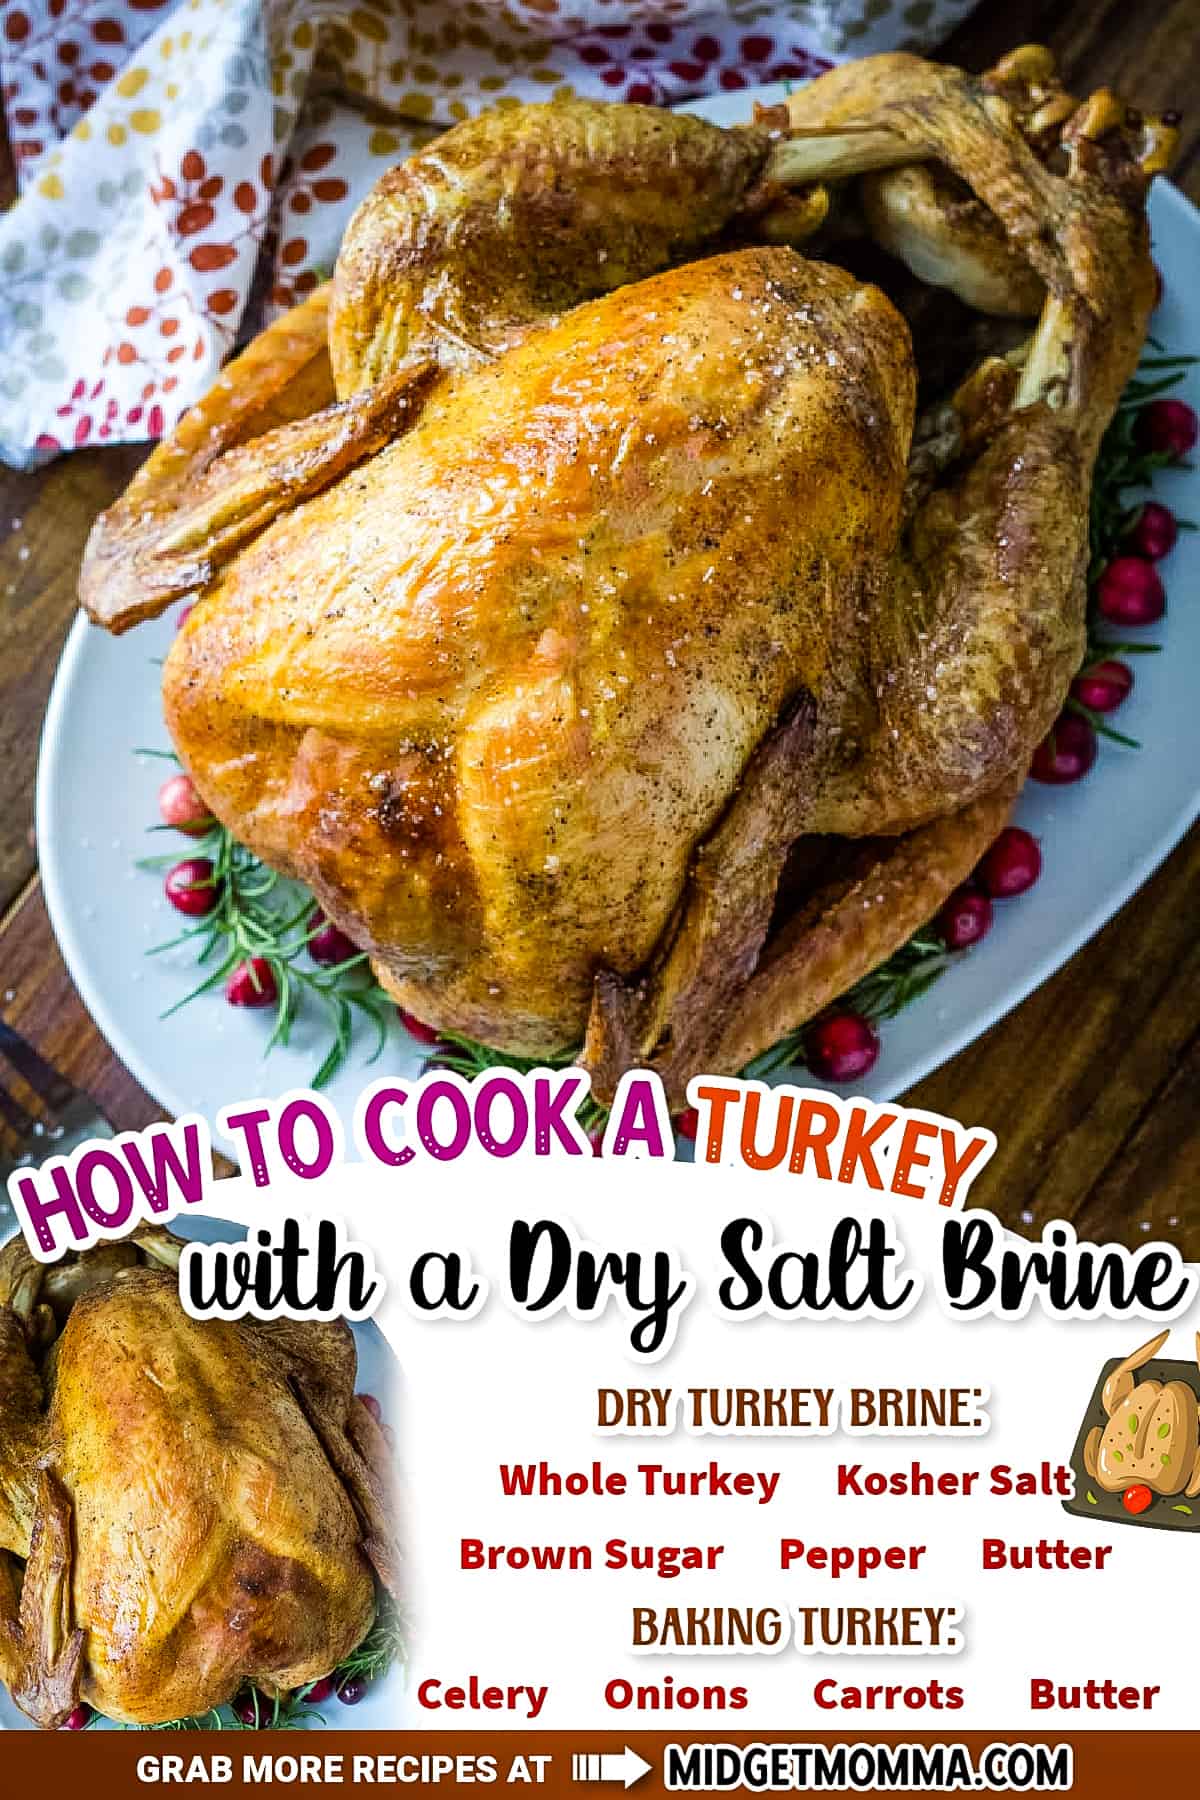 How to cook a turkey with a dry salt brine.